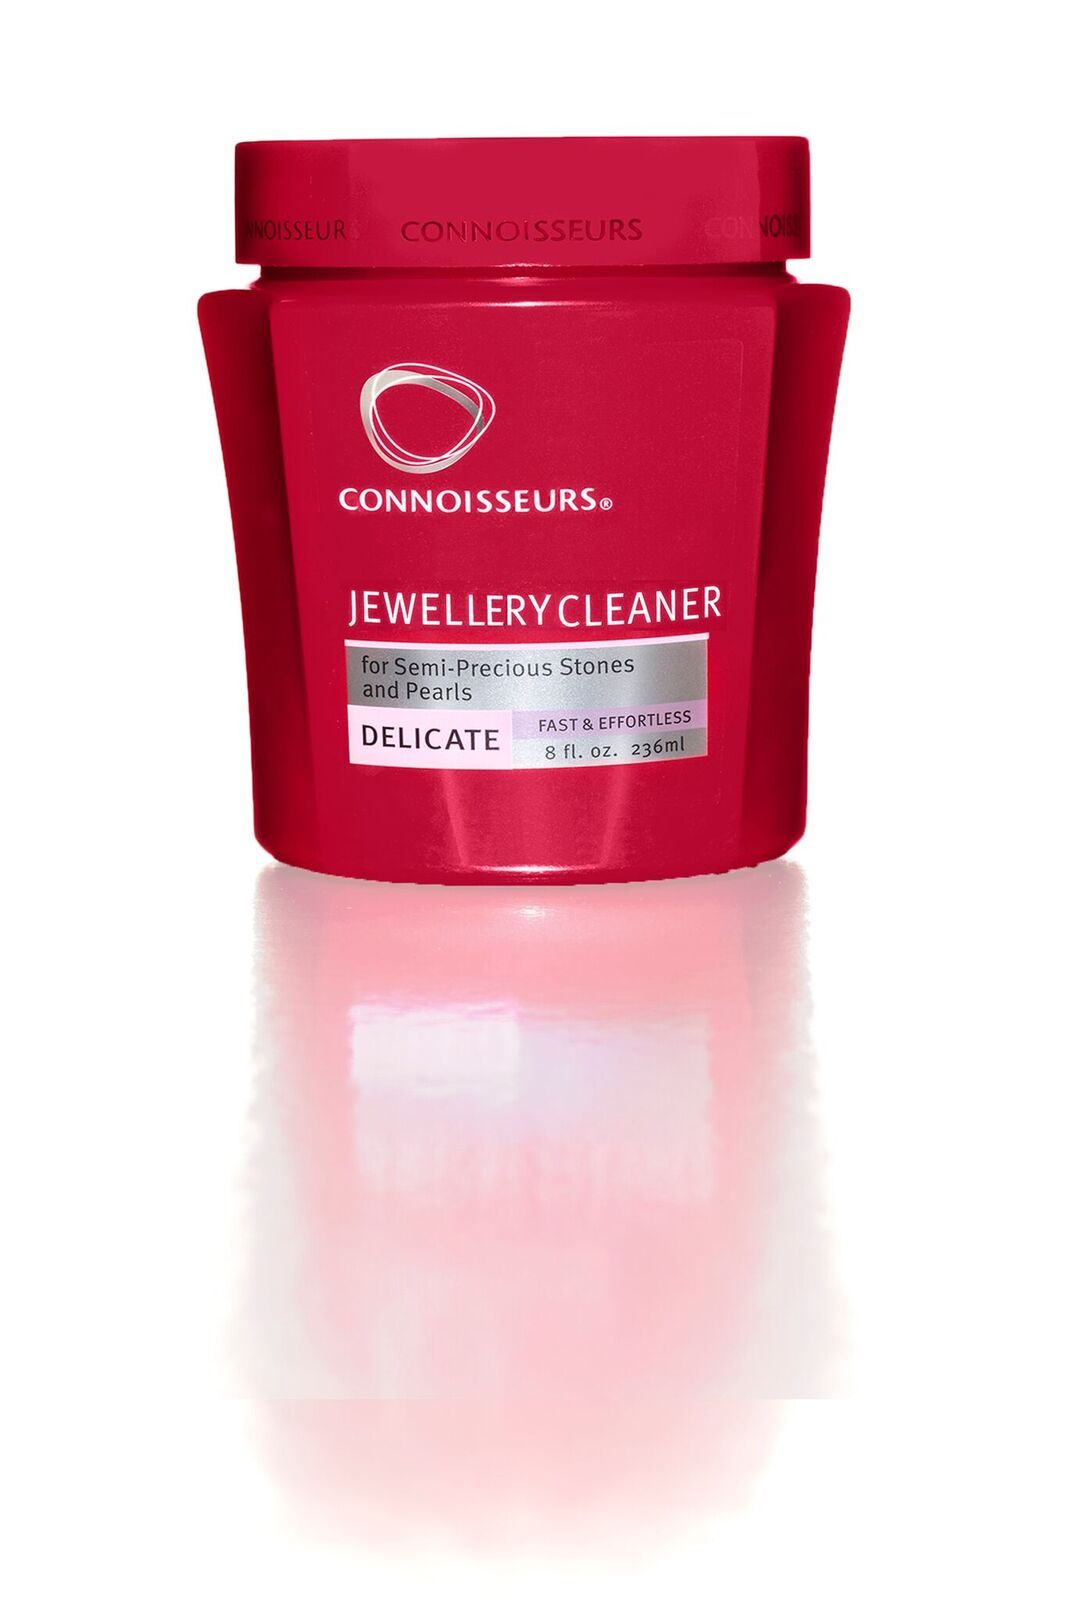 Connoisseurs Delicate Jewellery Cleaner Jewellery Connoissers 